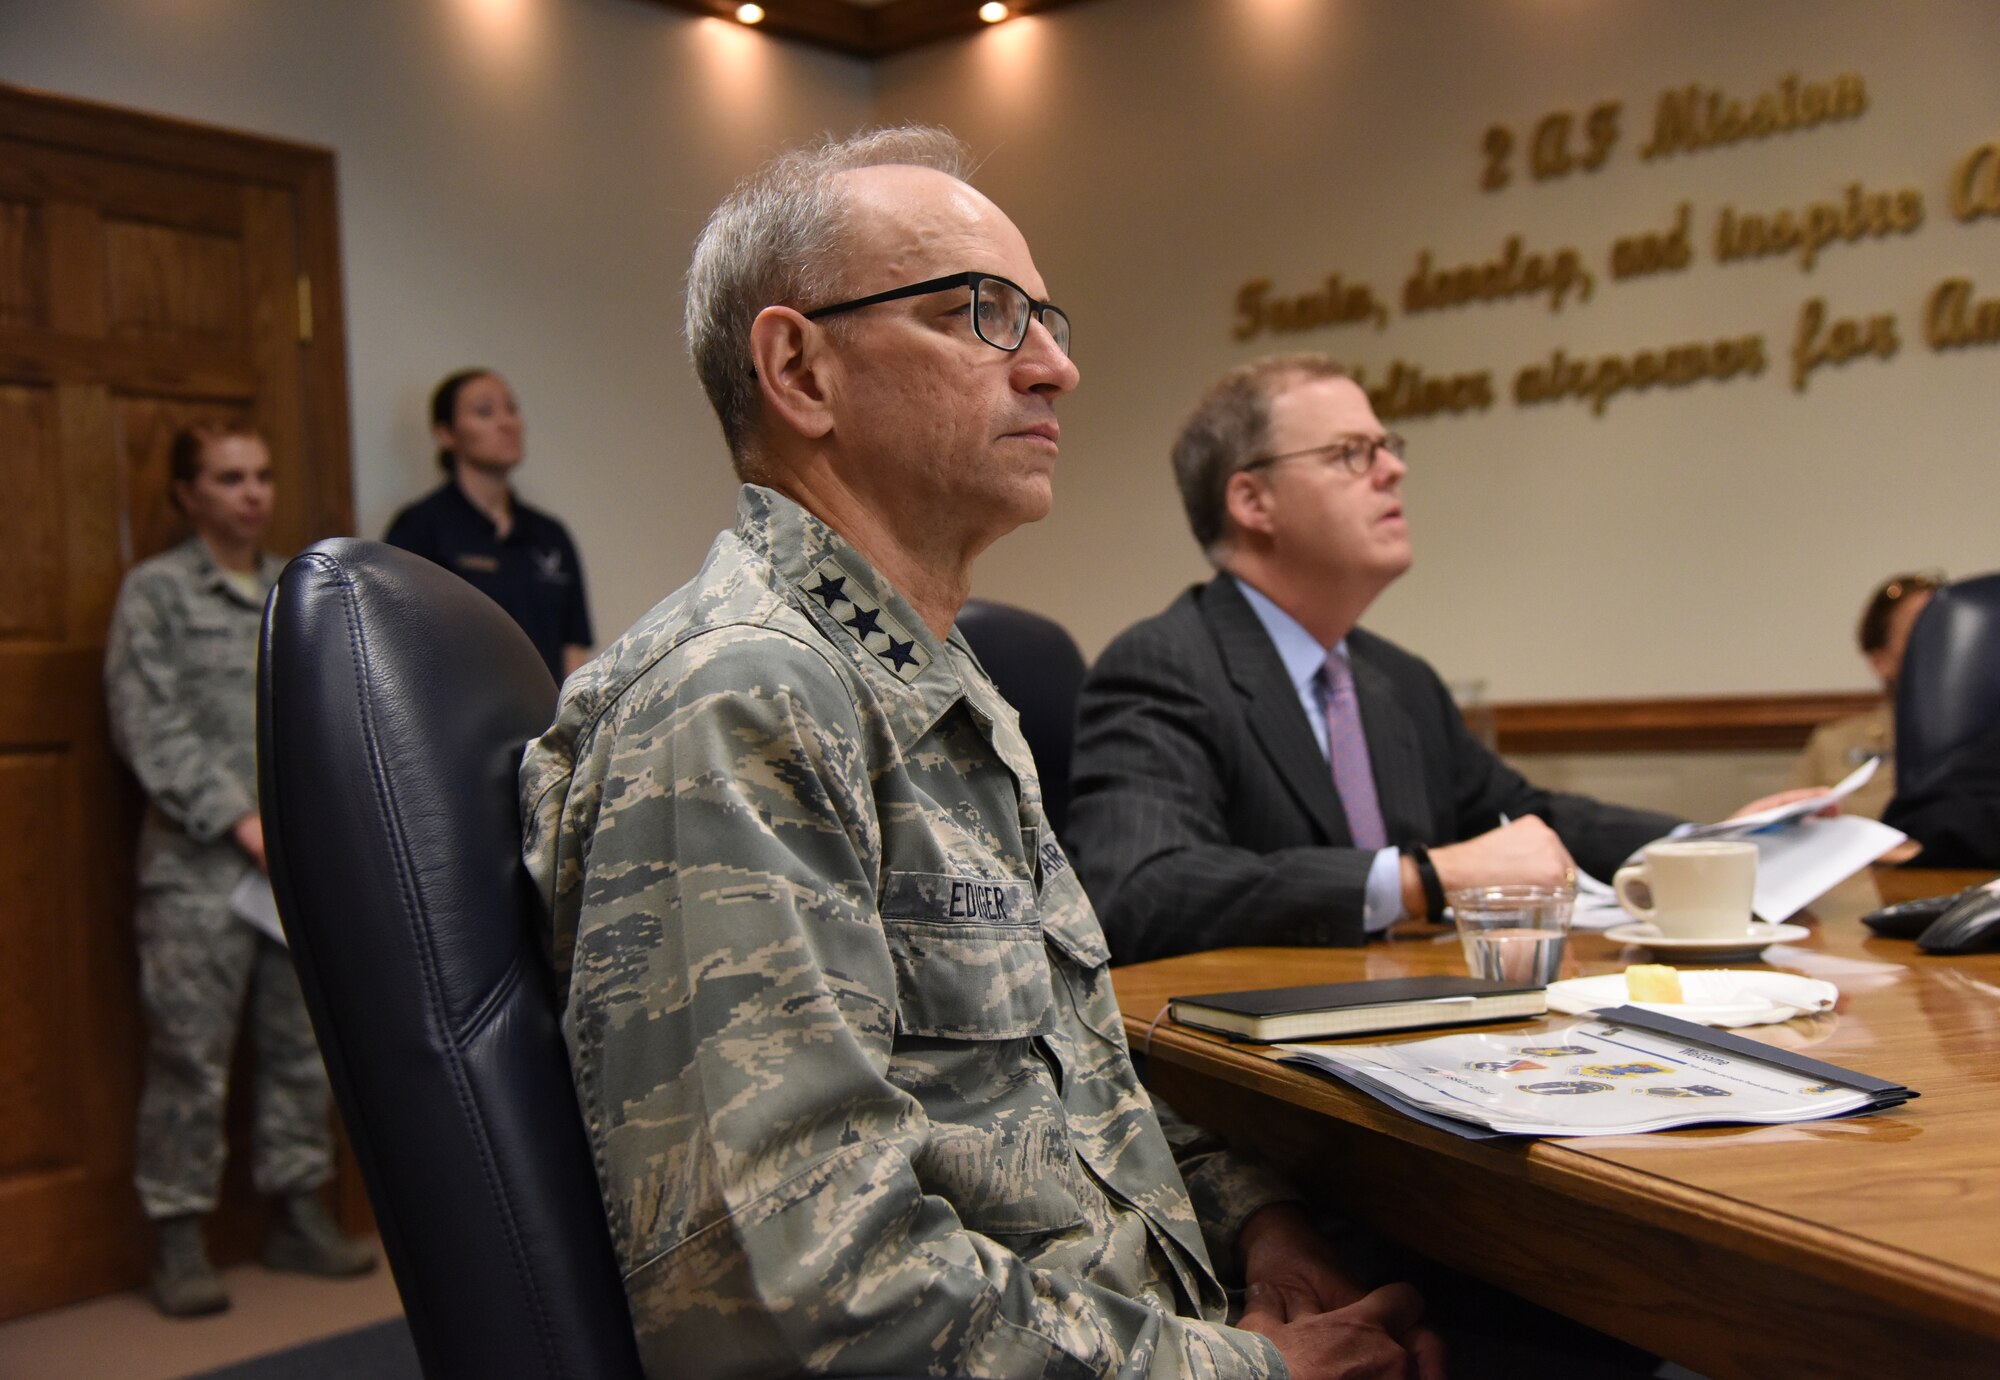 U.S. Air Force Lt. Gen. Mark Ediger, Air Force Surgeon General, and Thomas McCaffery, Acting Assistant Secretary of Defense for Health Affairs, attend the 81st Training Wing mission brief at the 2nd Air Force headquarters building during a site visit at Keesler Air Force Base, Mississippi, April 27, 2018. The purpose of the visit was to get oriented with base operations and the Keesler Medical Center. The visit also included an office call with 2nd AF leadership and tours of the Clinical Research Lab and the newly renovated 81st Dental Squadron clinic. (U.S. Air Force photo by Kemberly Groue)